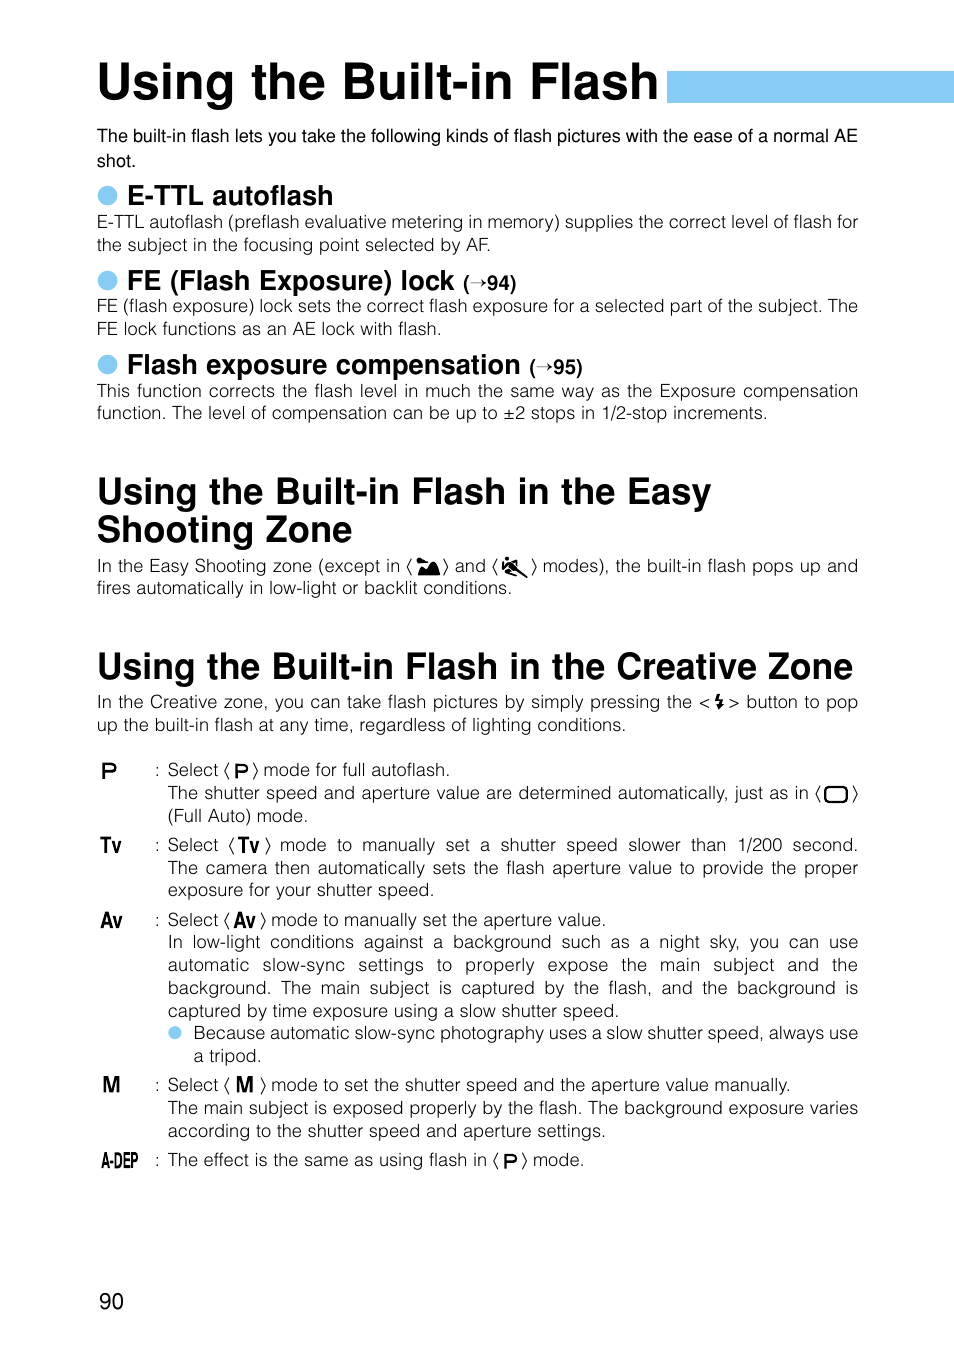 Using the built-in flash, Red-eye reduction, Fe lock | Flash exposure compensation, Using the built-in flash in the easy shooting zone, Using the built-in flash in the creative zone, E-ttl autoflash, Fe (flash exposure) lock | Canon EOS D30 User Manual | Page 90 / 152